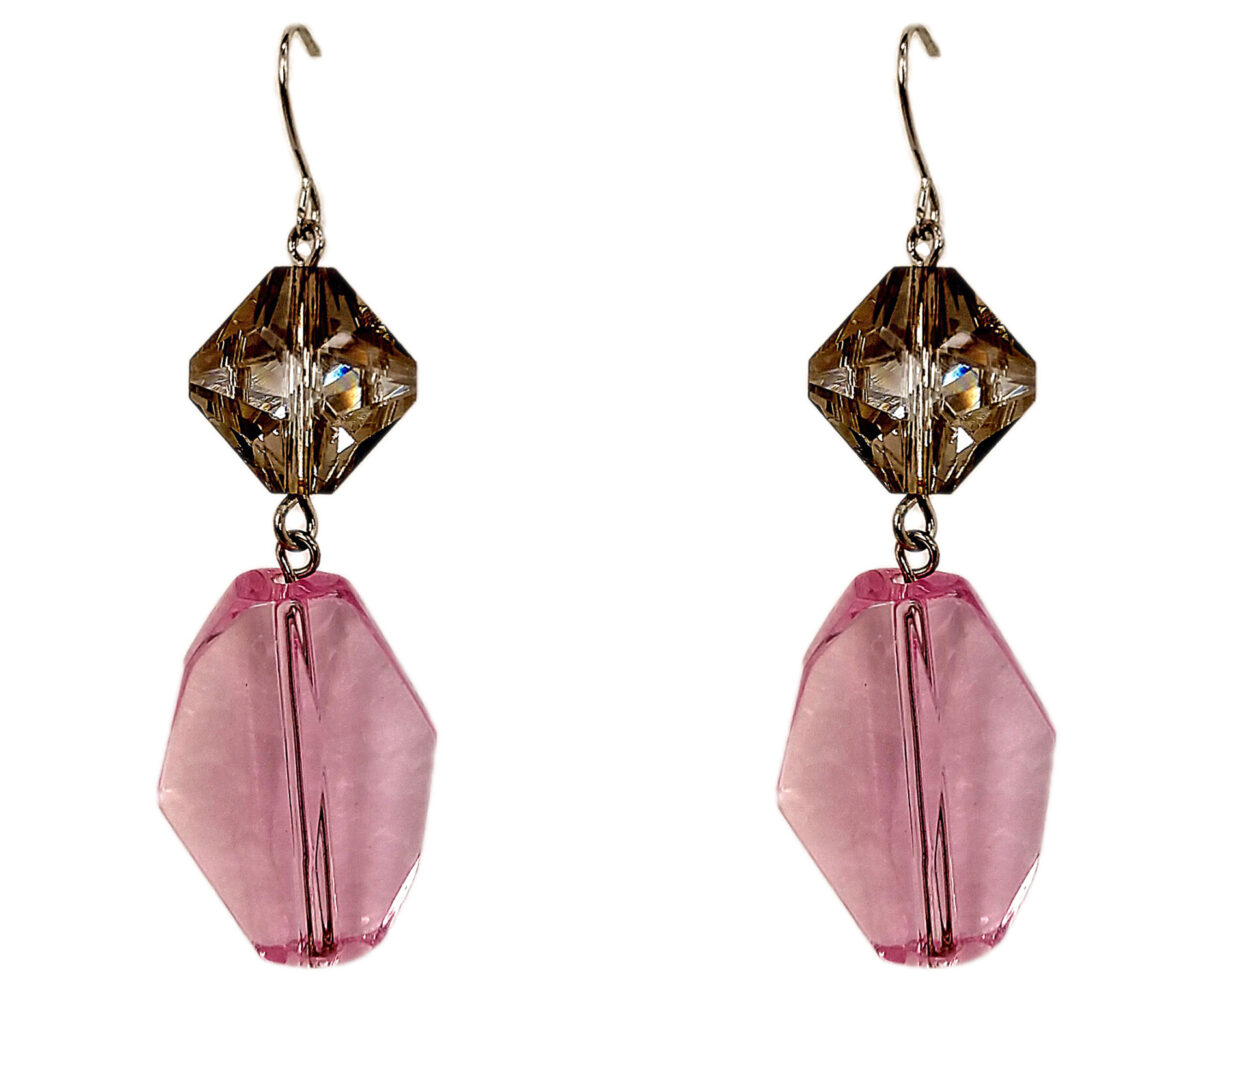 earrings with brown and magenta gems